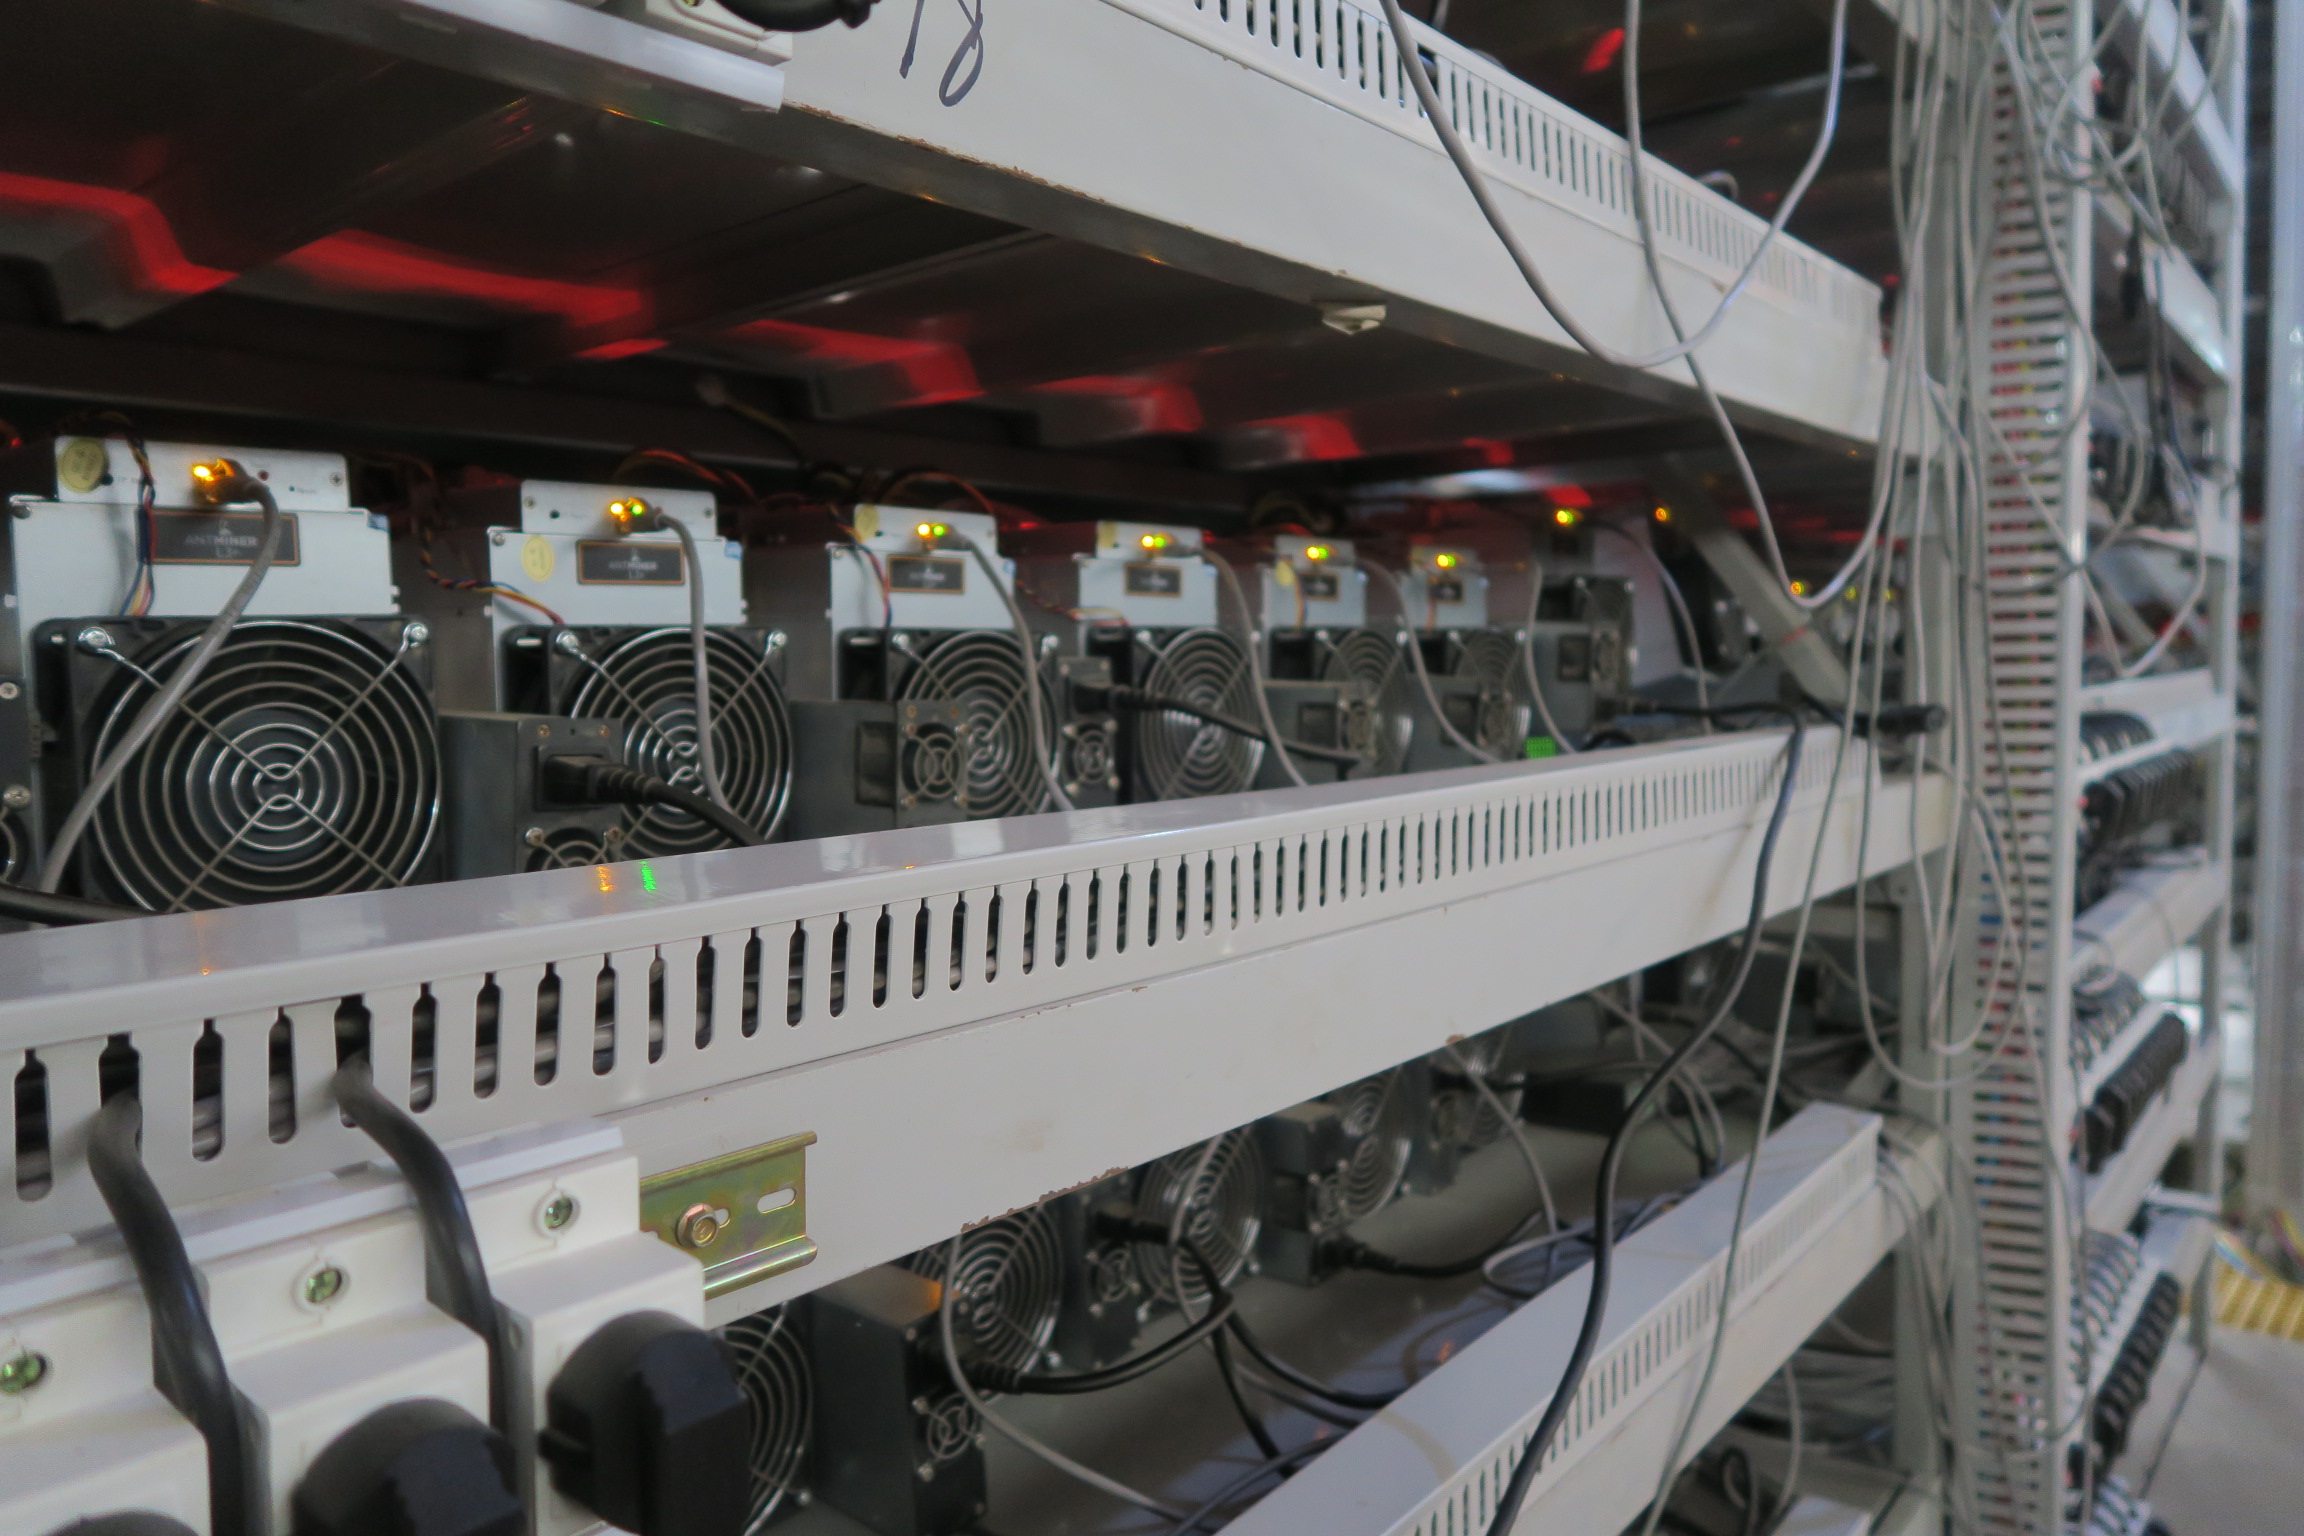 China's bitcoin mining scene is catching the eye of the ...